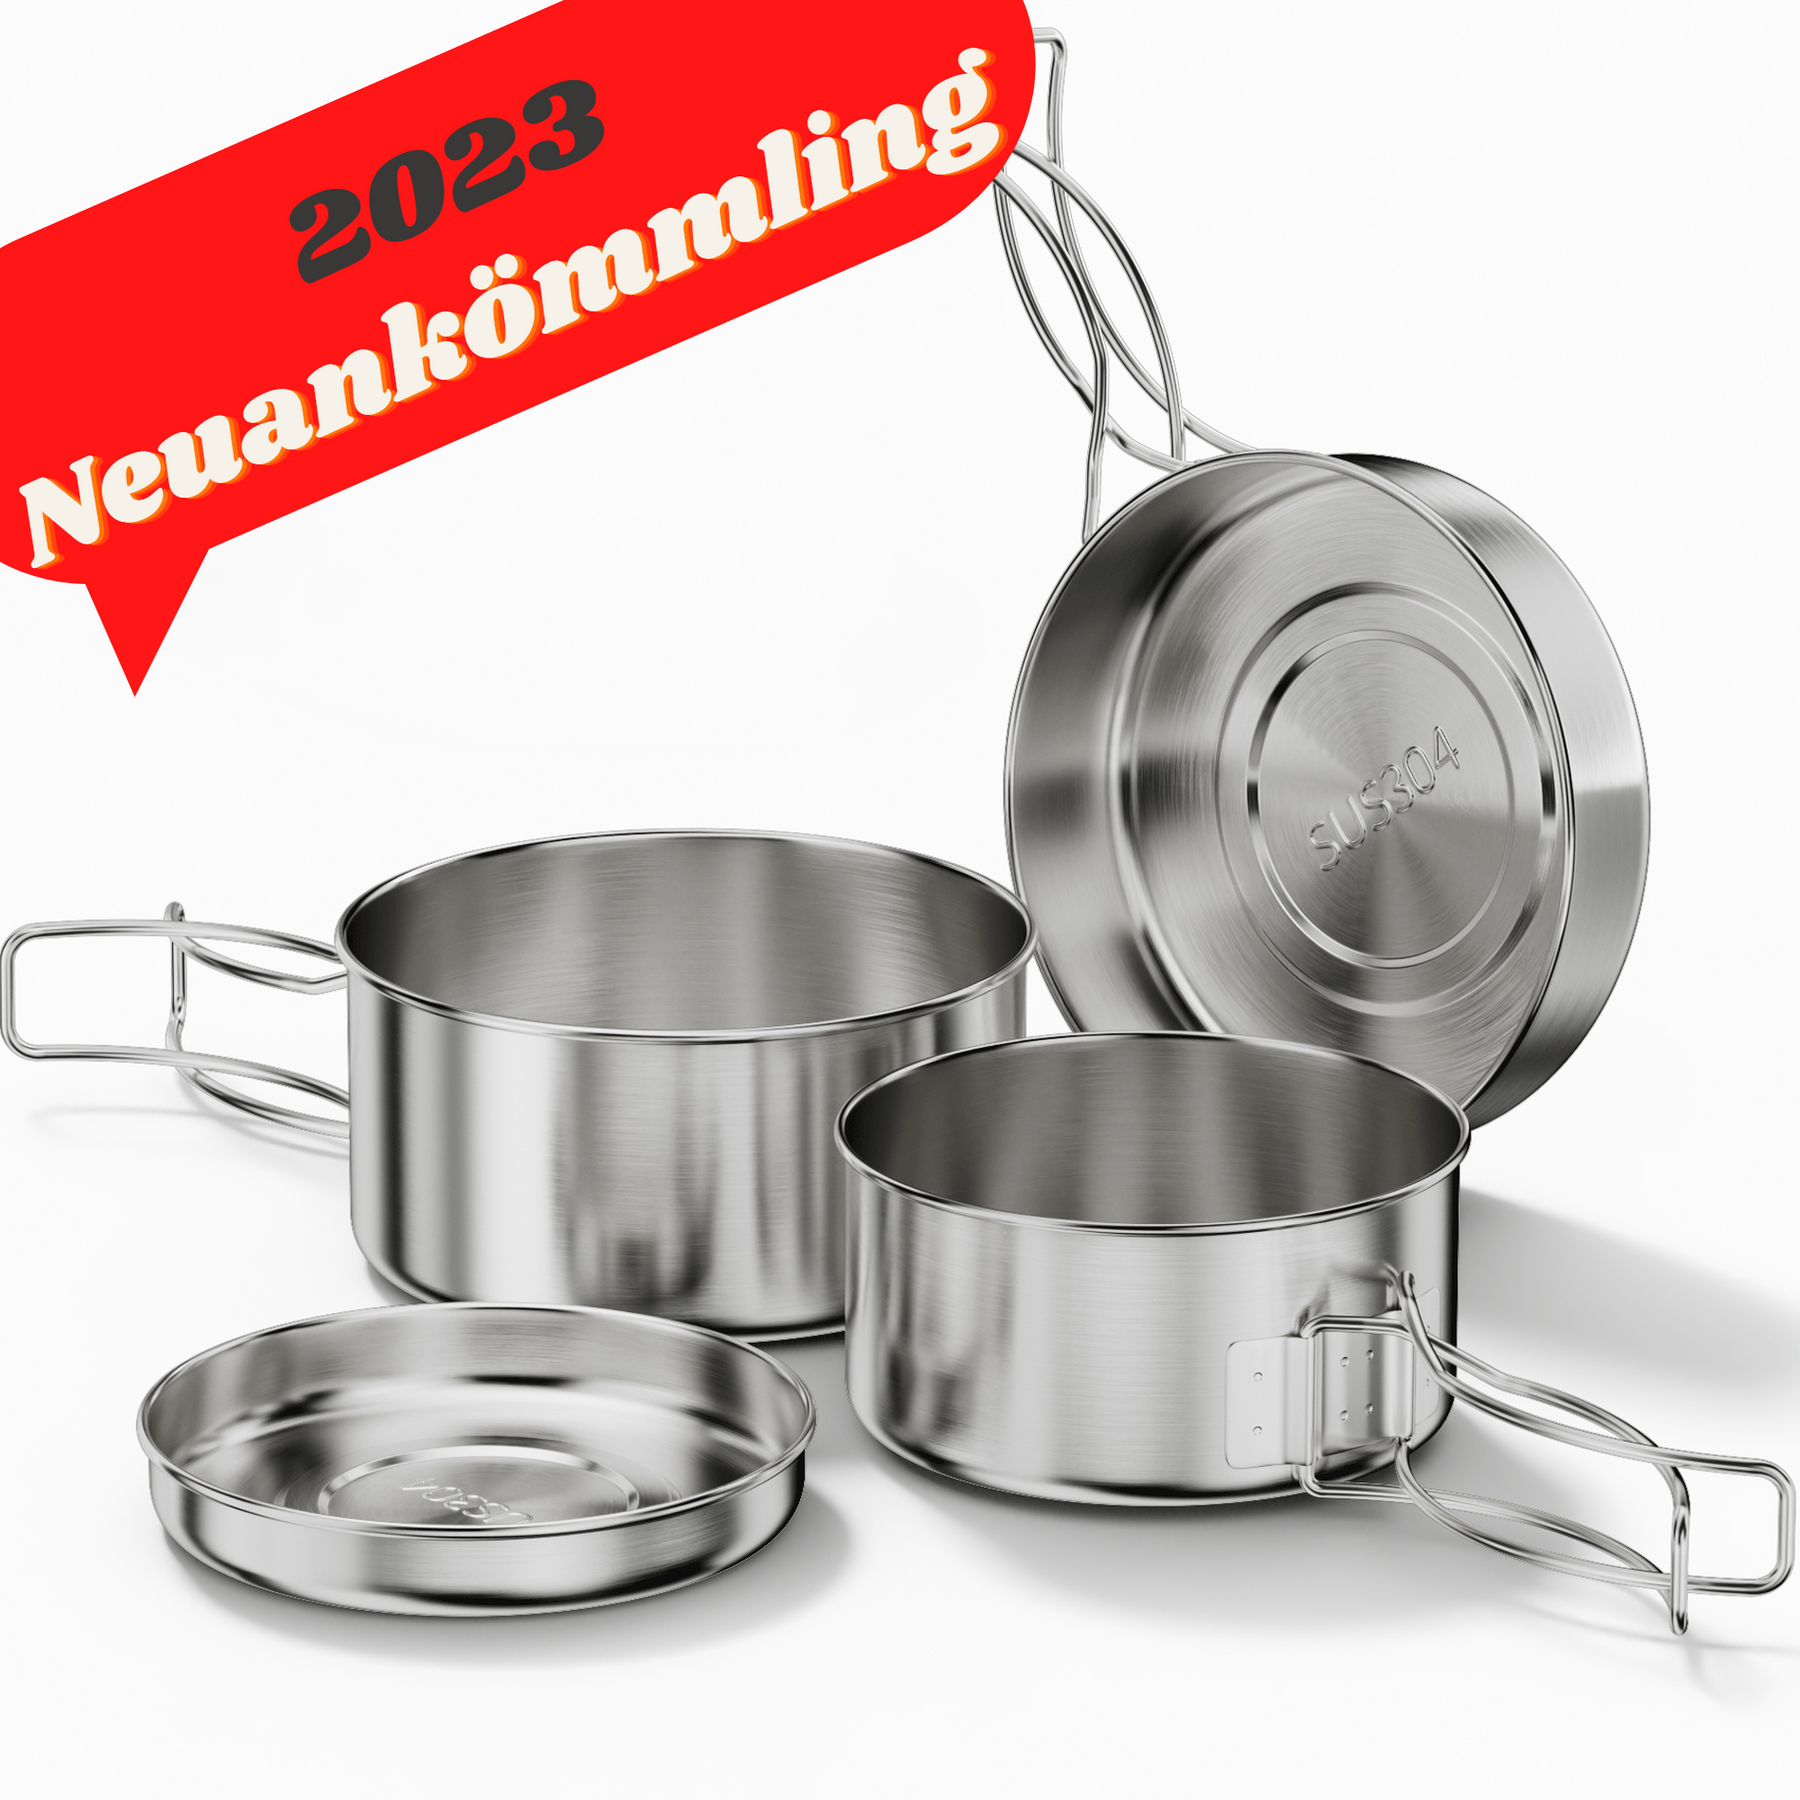  CretFine 304 Stainless Steel Camping Cookware Set